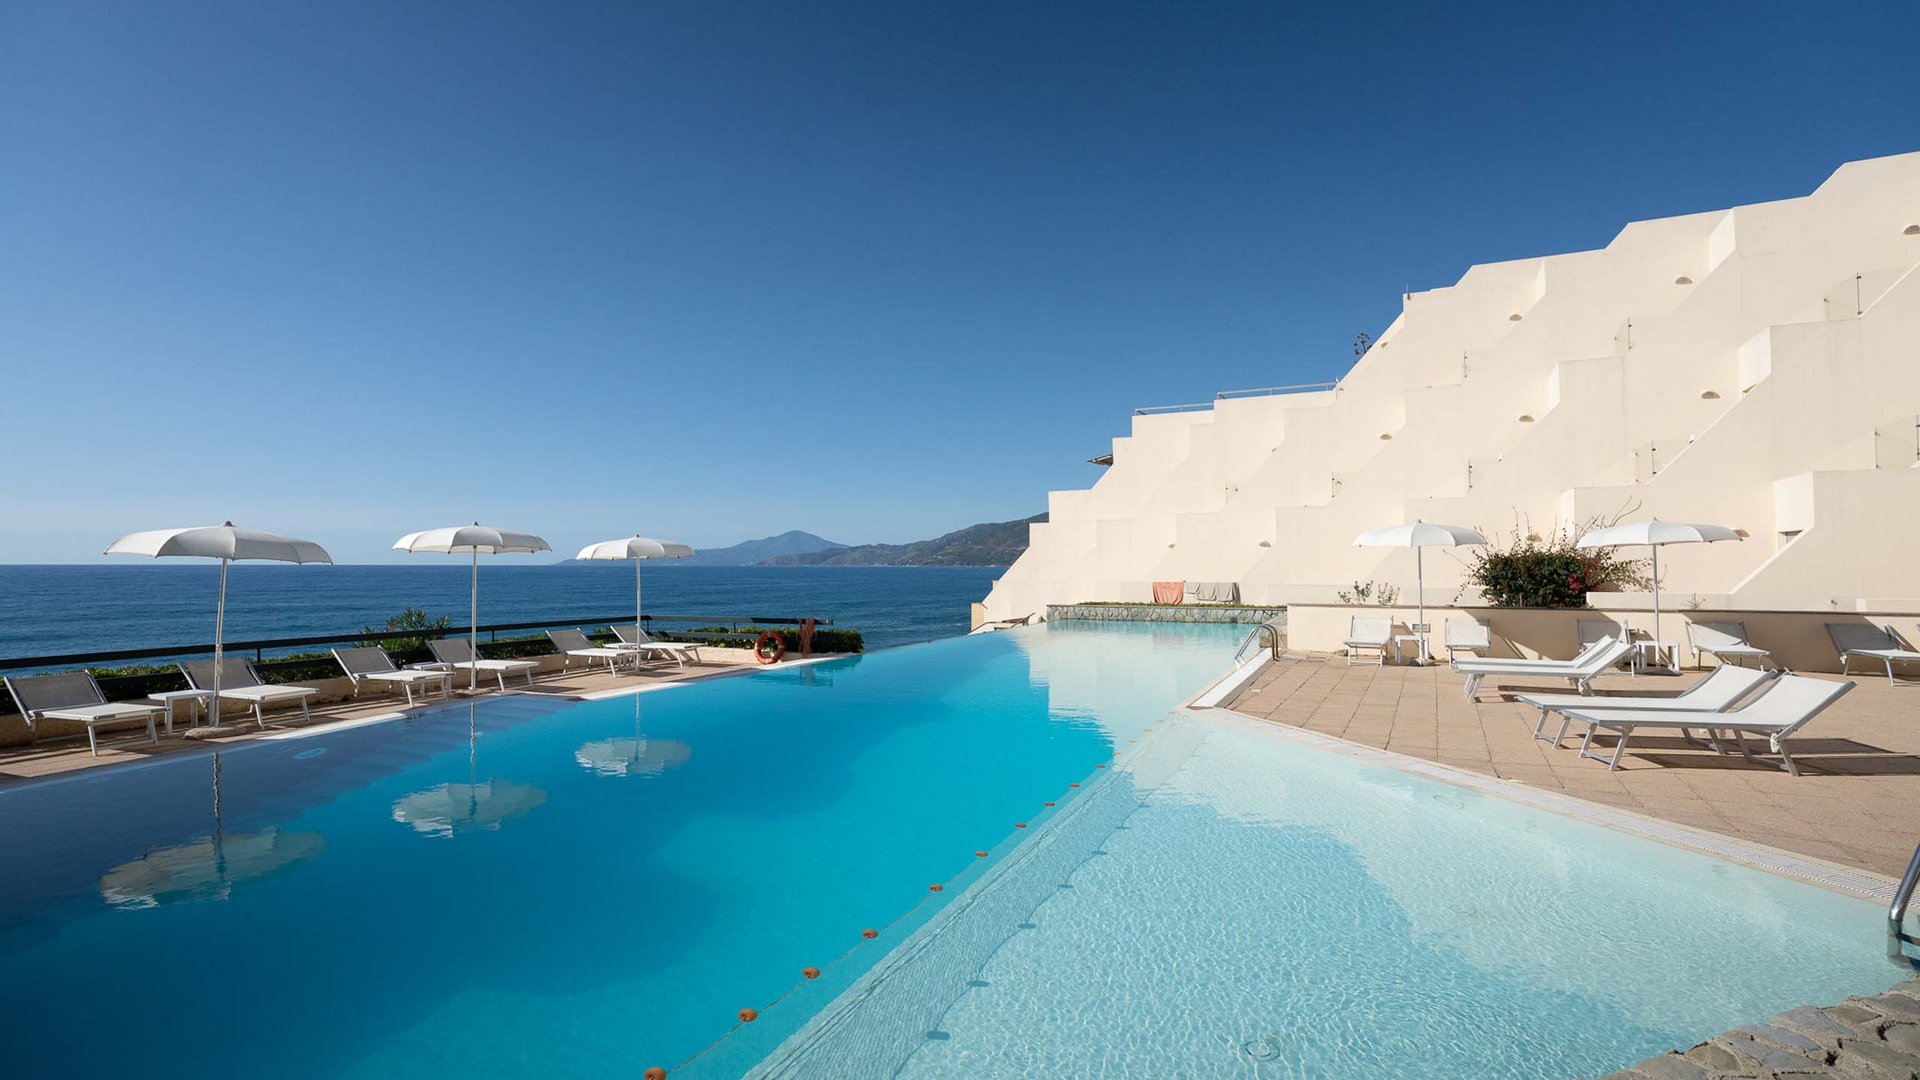 The hotel in Palinuro that makes you dream